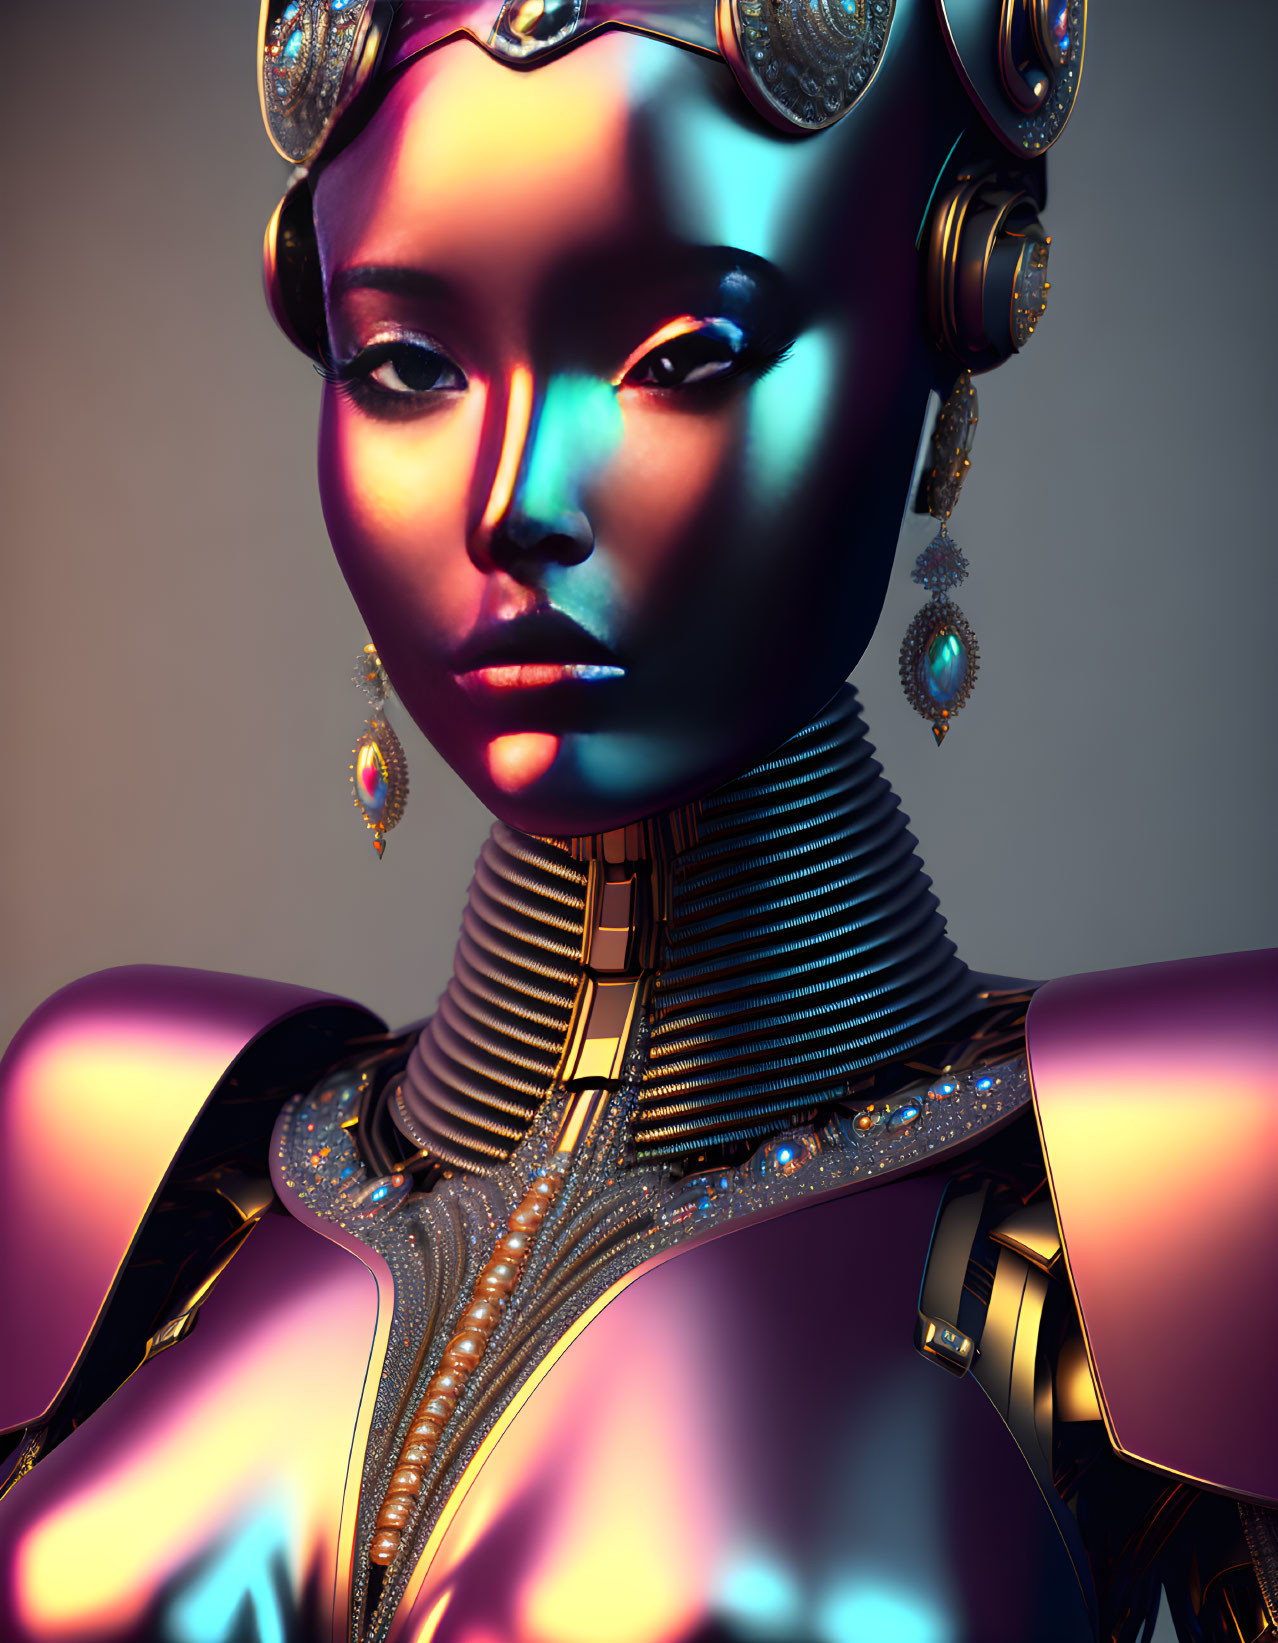 Stylized Female Android with Metallic Skin and Futuristic Attire